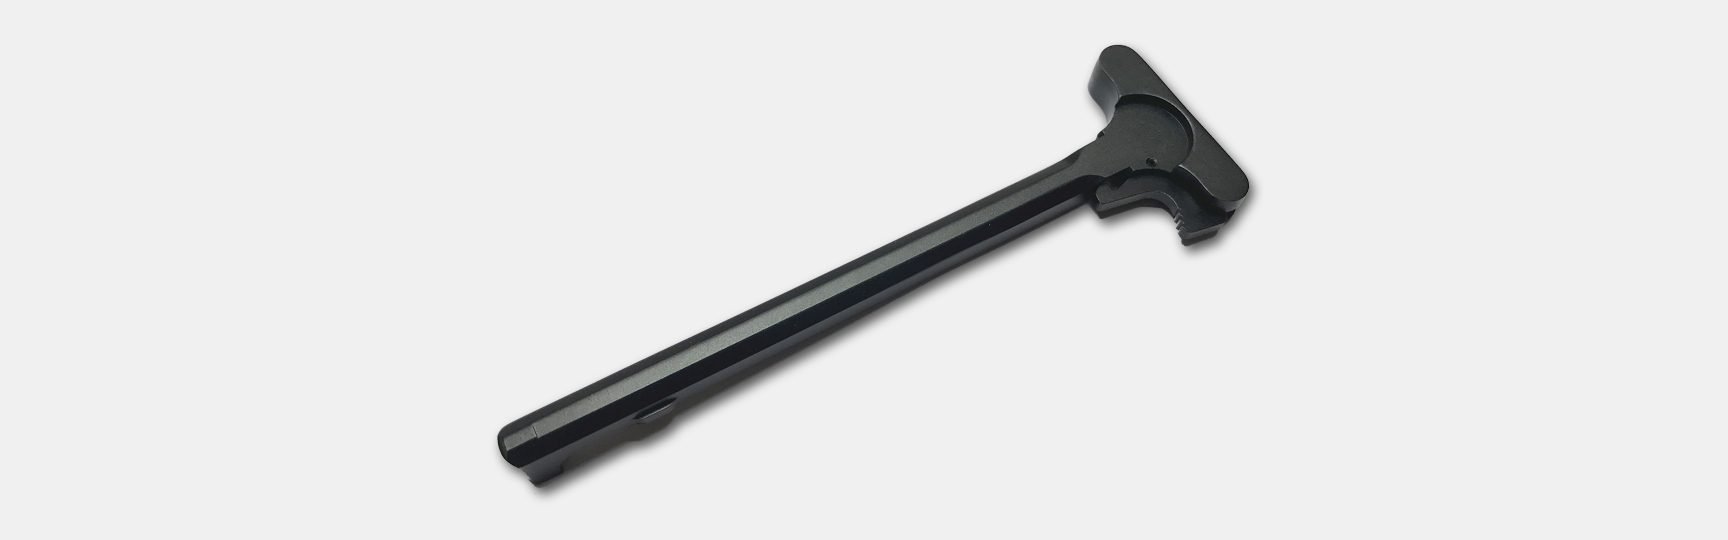 Upgrading the Charging Handle